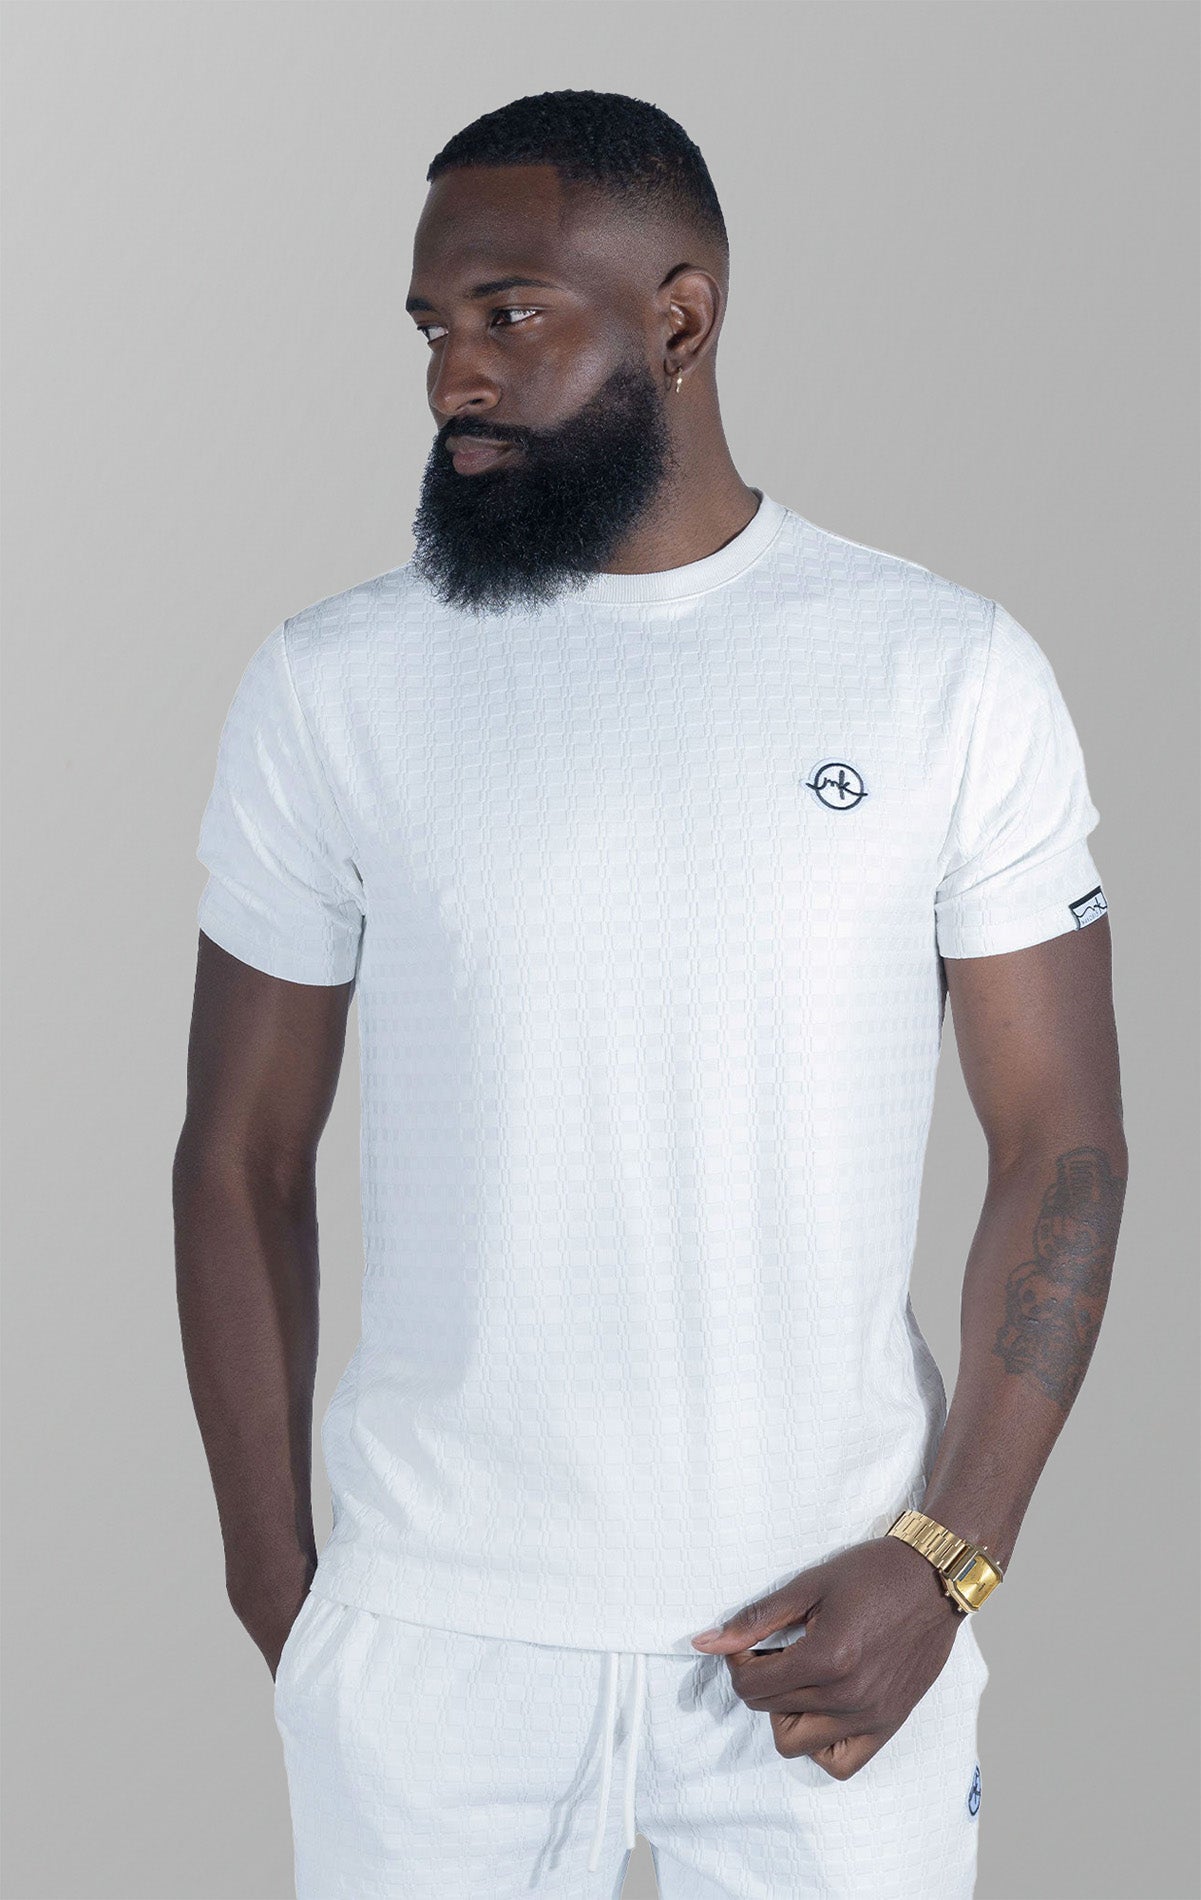 White Modena Knit Tee. Made from a high-quality blend of 95% cotton and 5% spandex for a soft and comfortable feel. Features a unique embossed jacquard fabric with colored blocking for a textured and stylish look.  This tee is pre-shrunk and true to size.